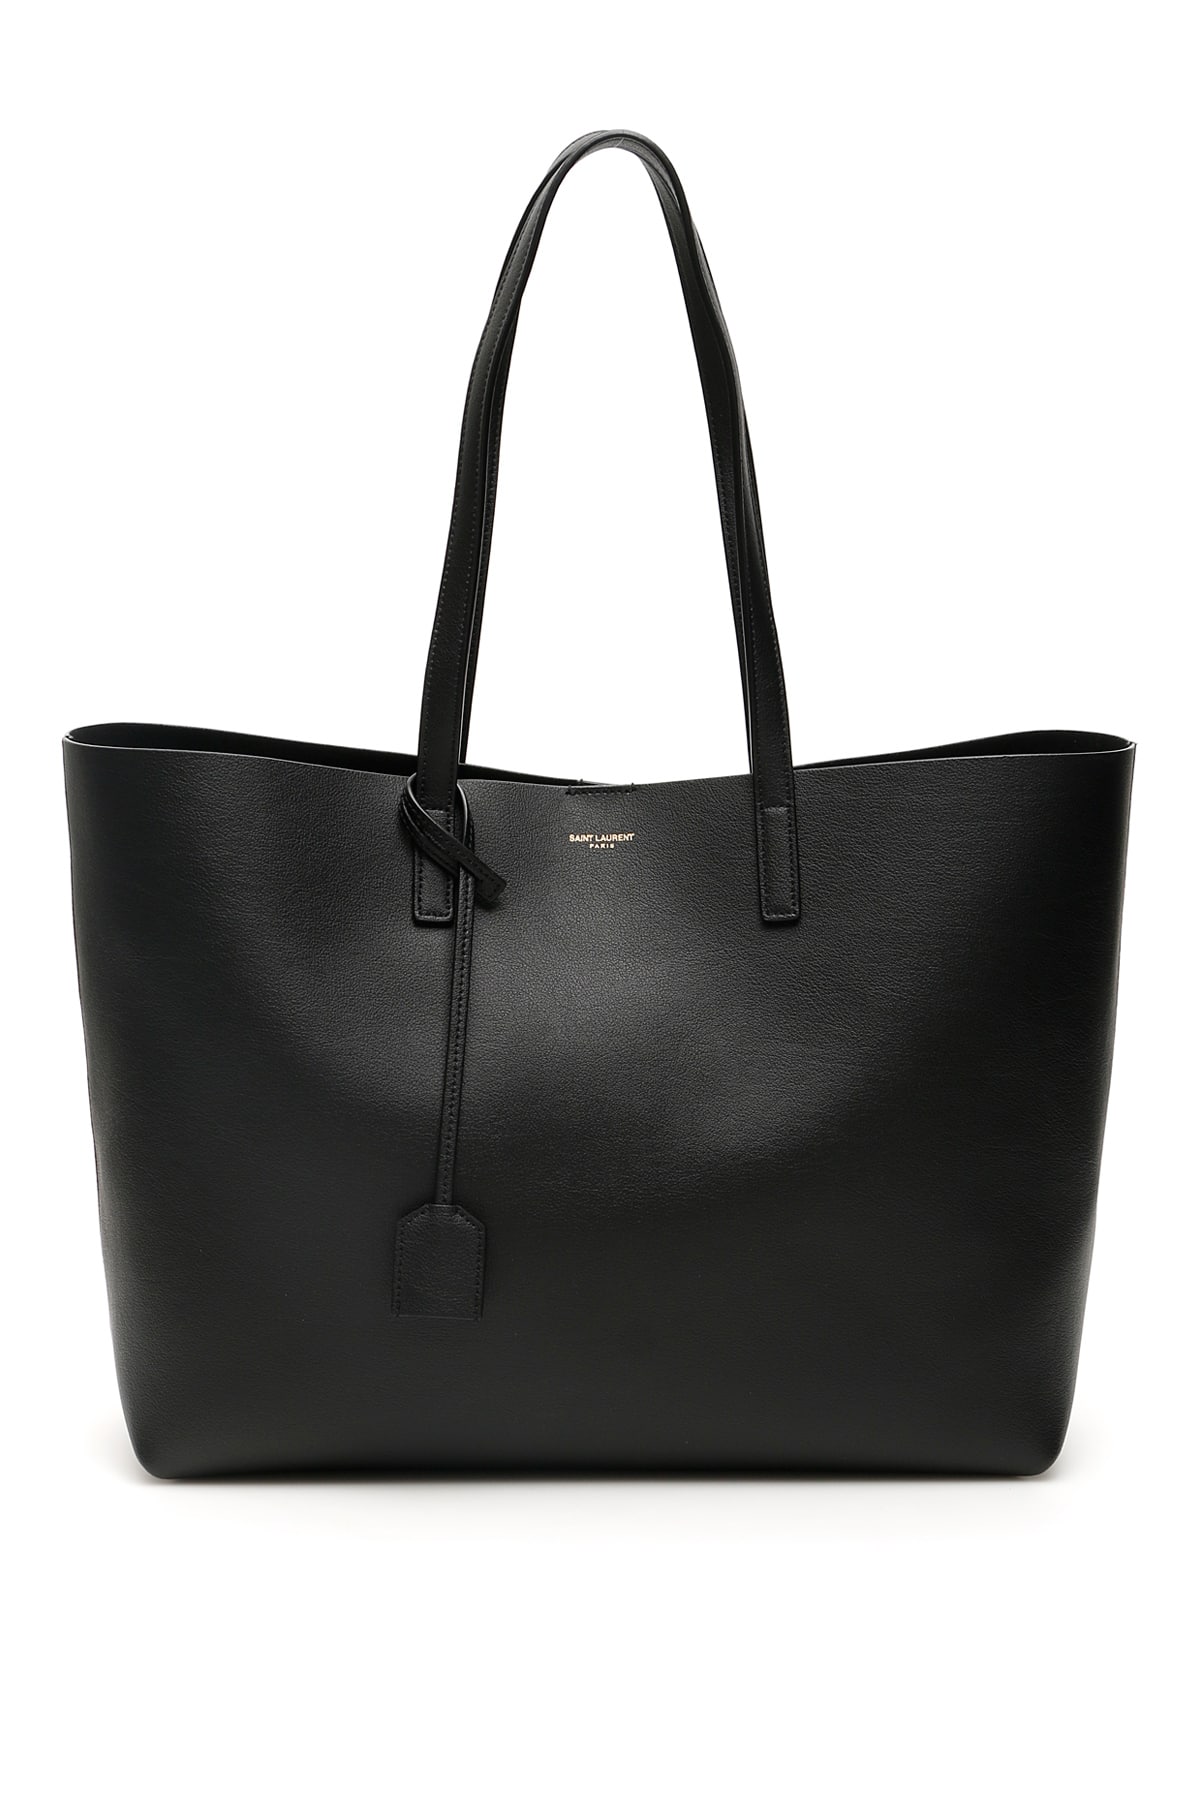 Saint Laurent East West leather shopping bag. Unstructured model with two handles, it may be worn by